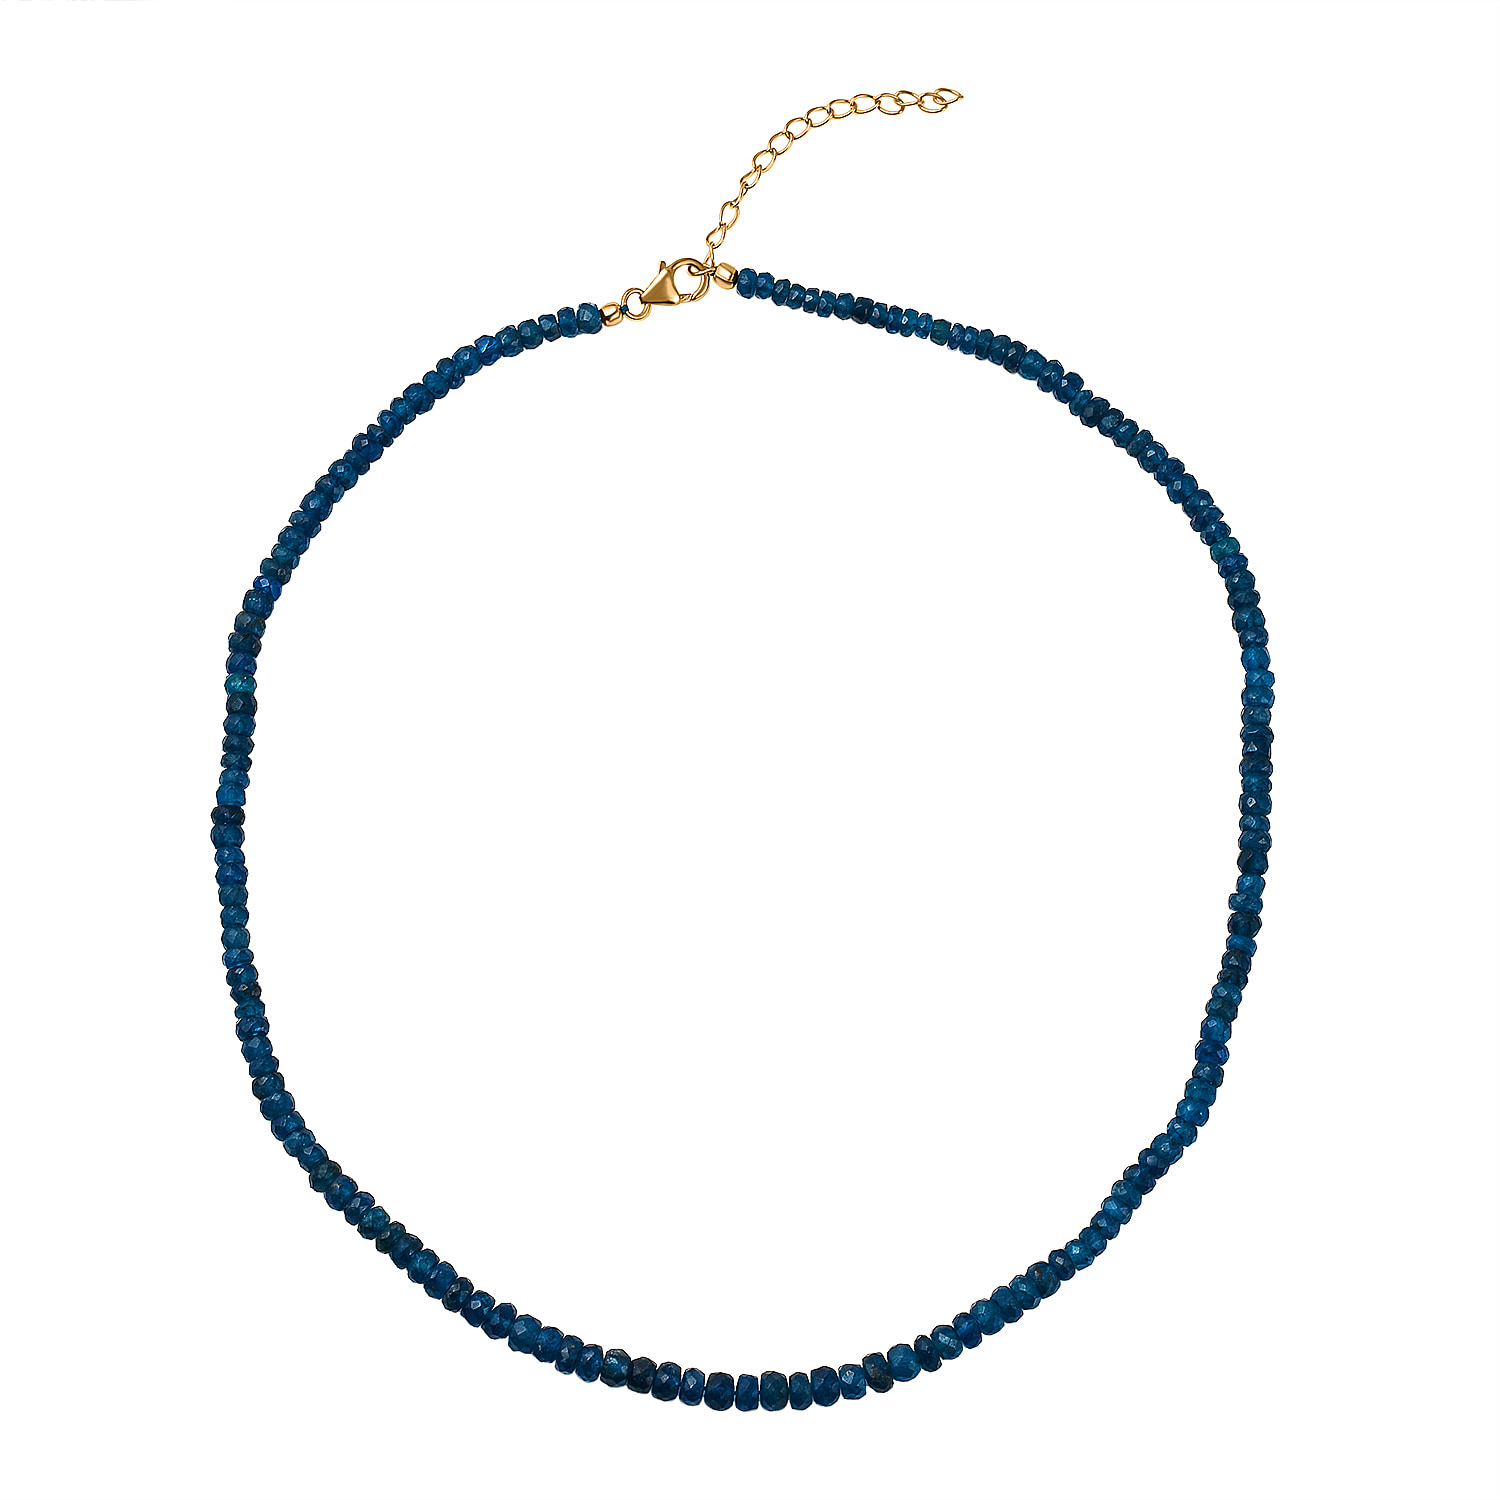 Malgache Neon Apatite Beads Necklace (Size - 20 with Extender) in Sterling Silver with 18K Vermeil Yellow Gold 80.77 Ct.